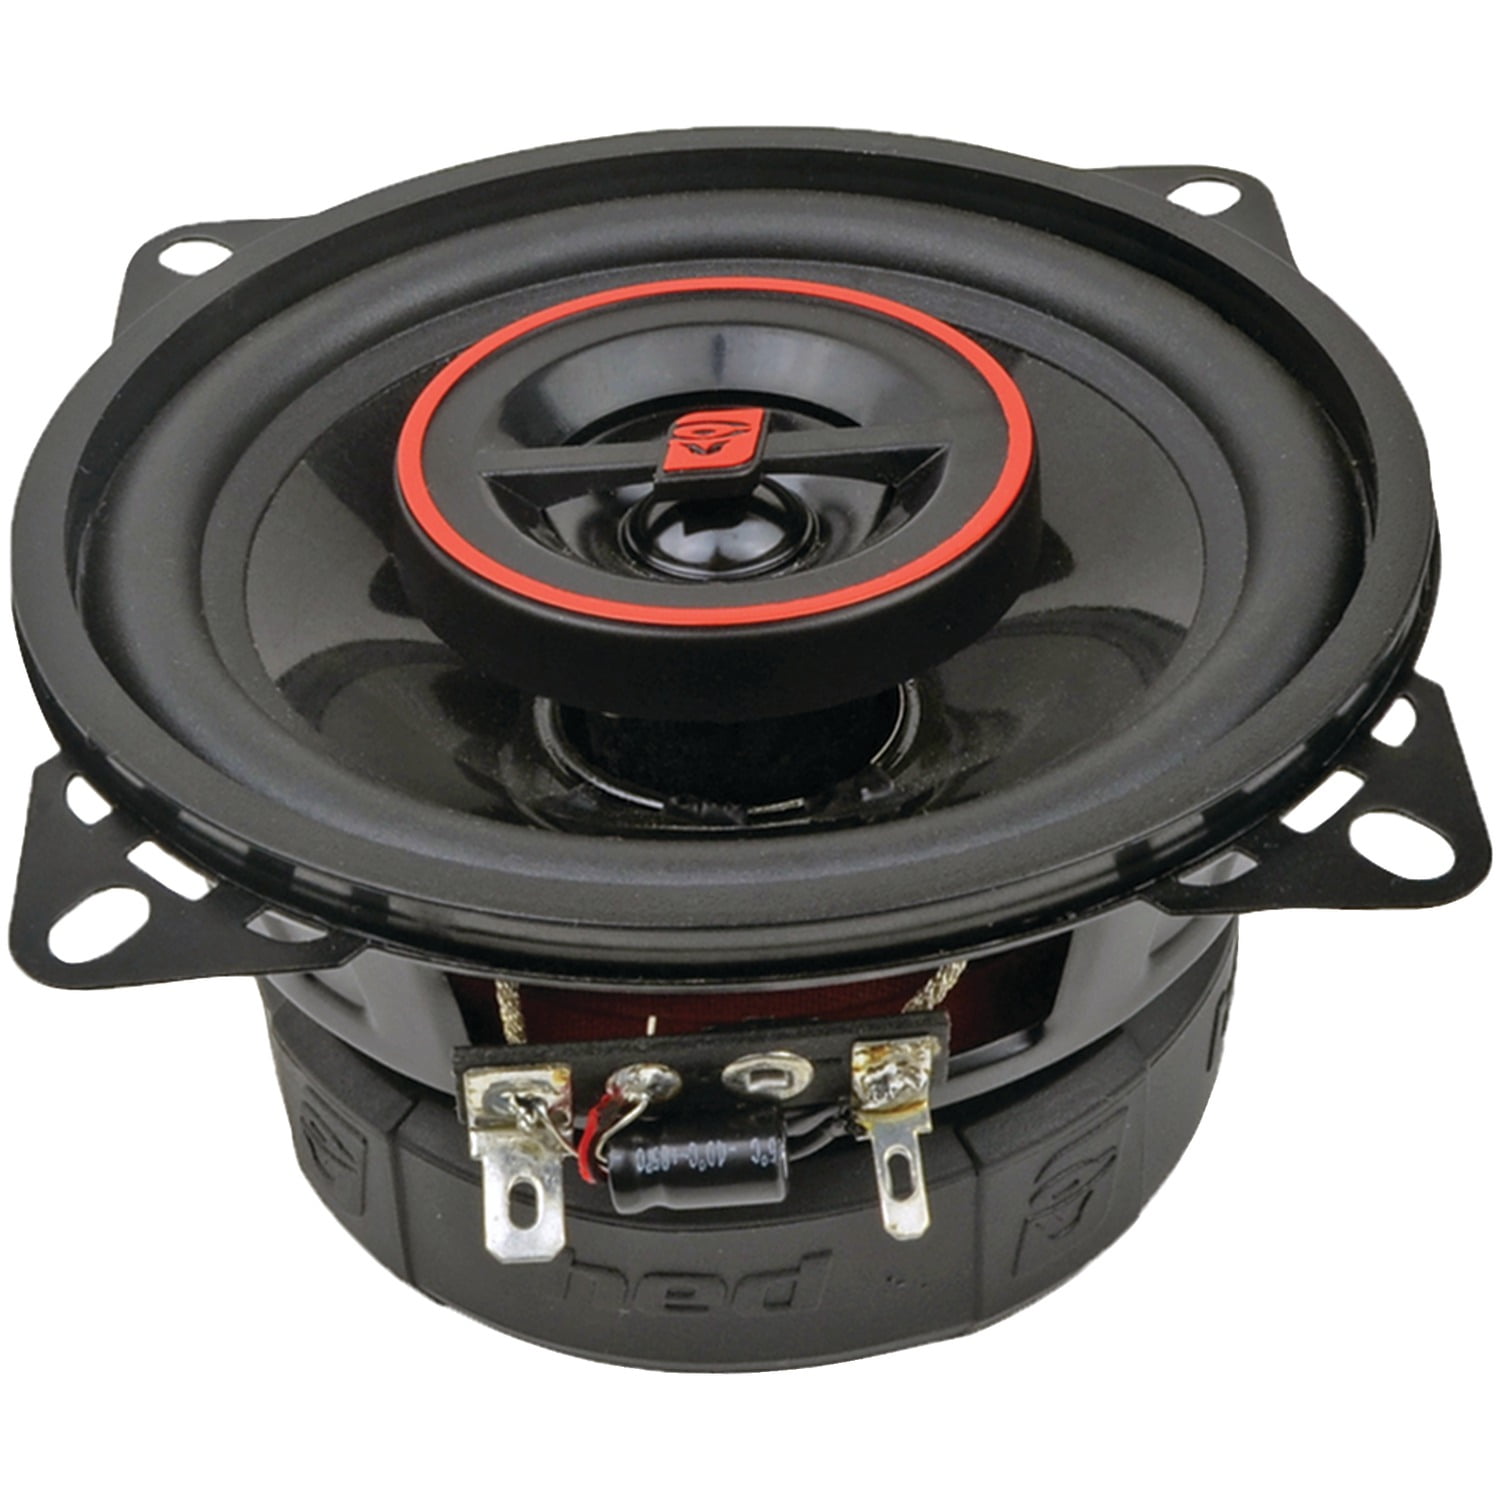 CERWIN-VEGA H746 550W 4x6 HED Series 2-way Coaxial Car Speakers